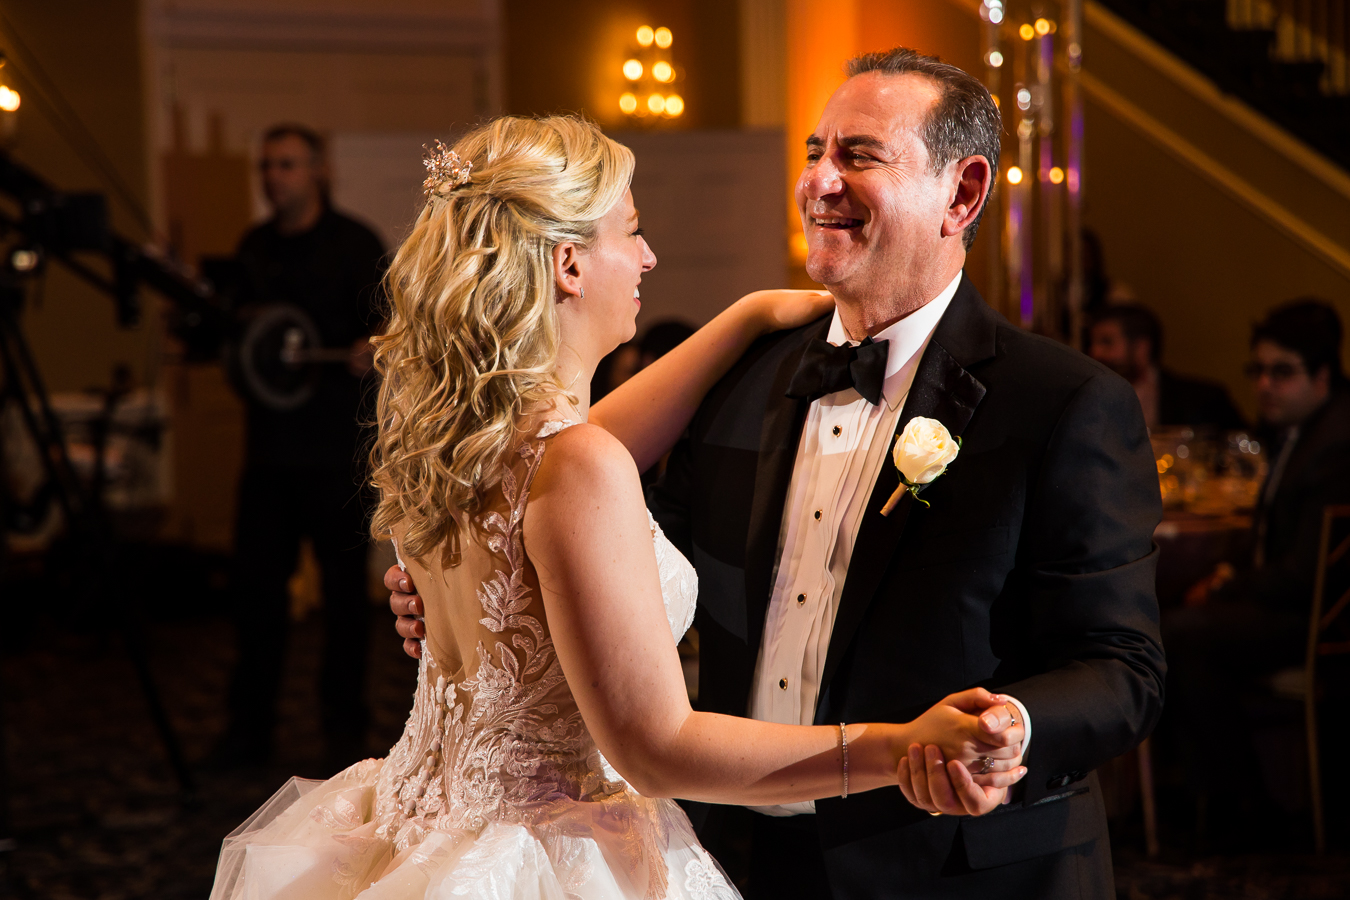 new jersey wedding photographer, lisa rhinehart, captures this authentic, loving image of the bride and her father sharing their father daughter dance during the wedding reception at the palace at somerset park 